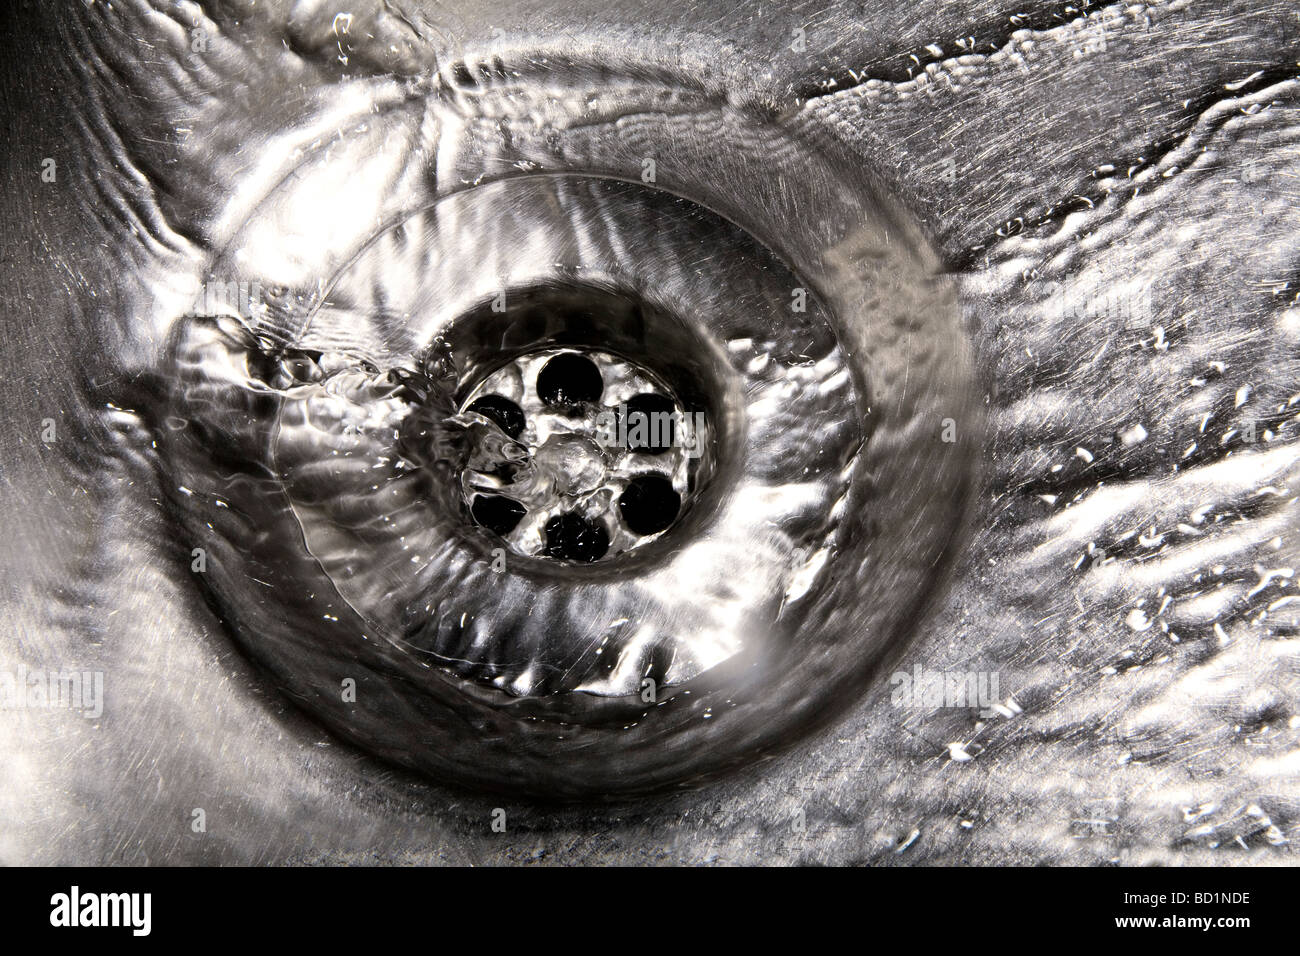 Water running down a plug hole Stock Photo